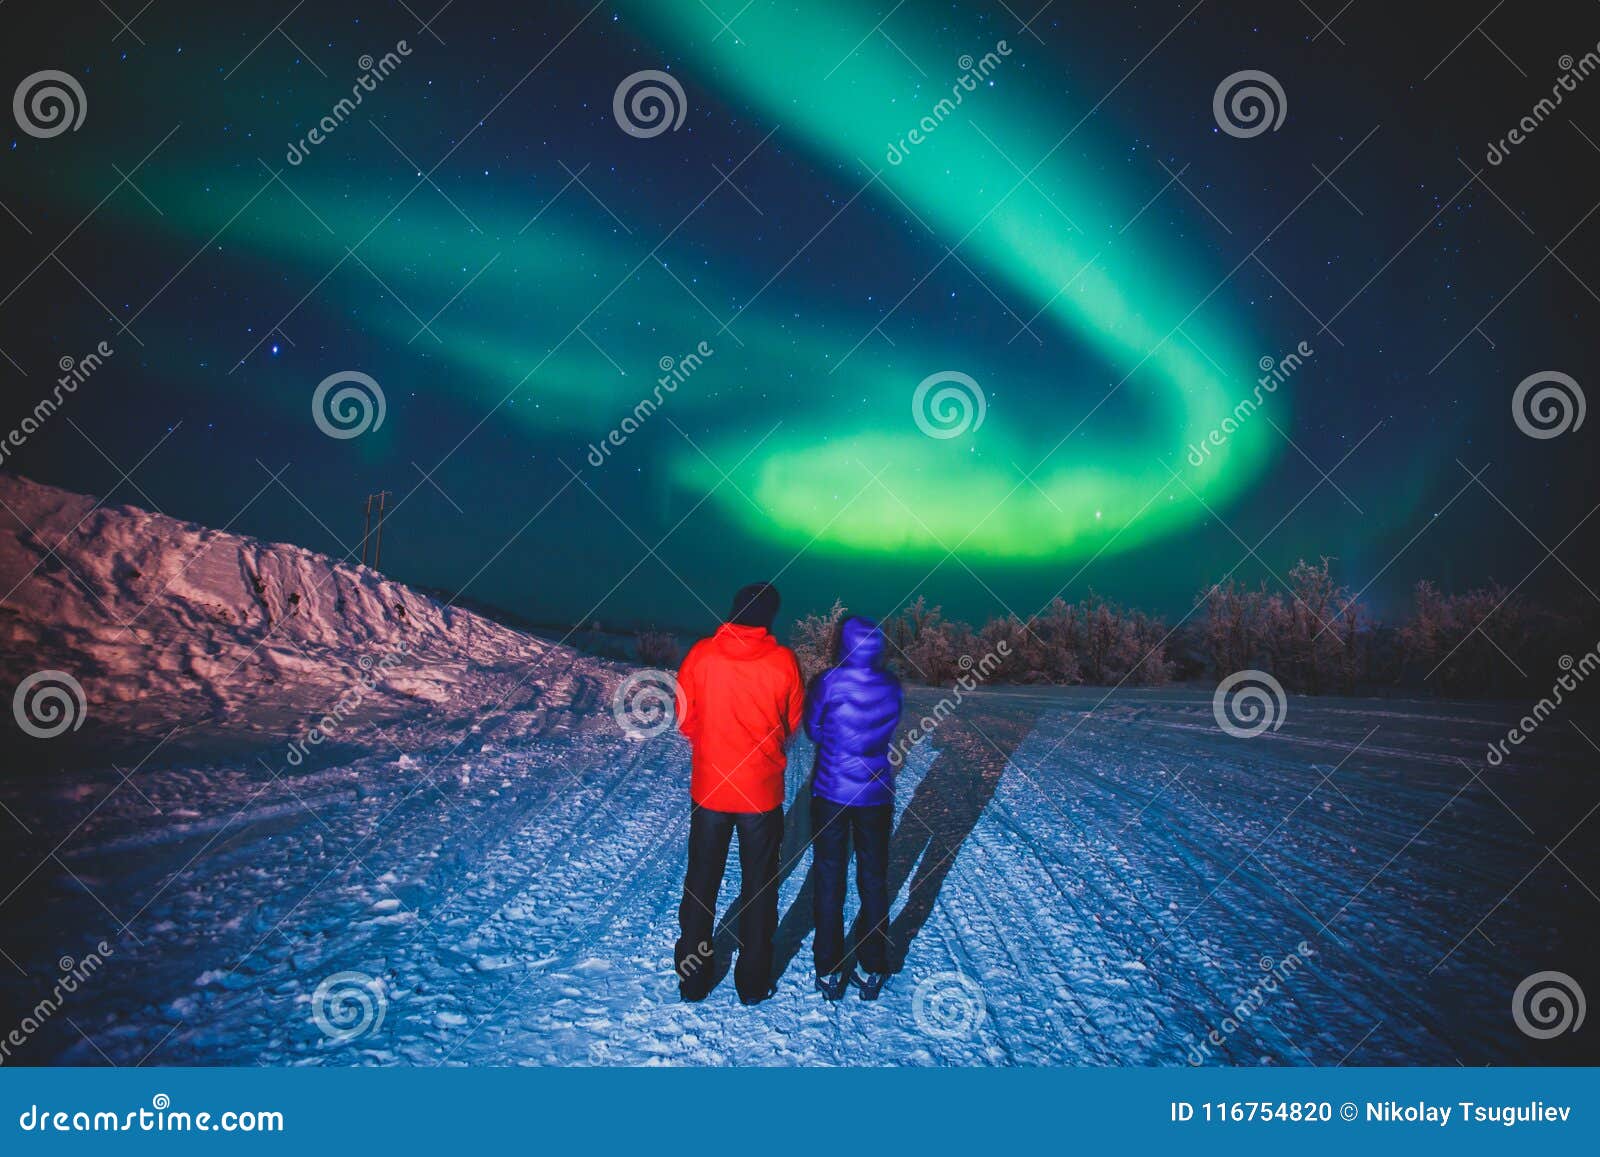 beautiful picture of massive multicolored green vibrant aurora borealis, also known as northern lights, sweden, lapland